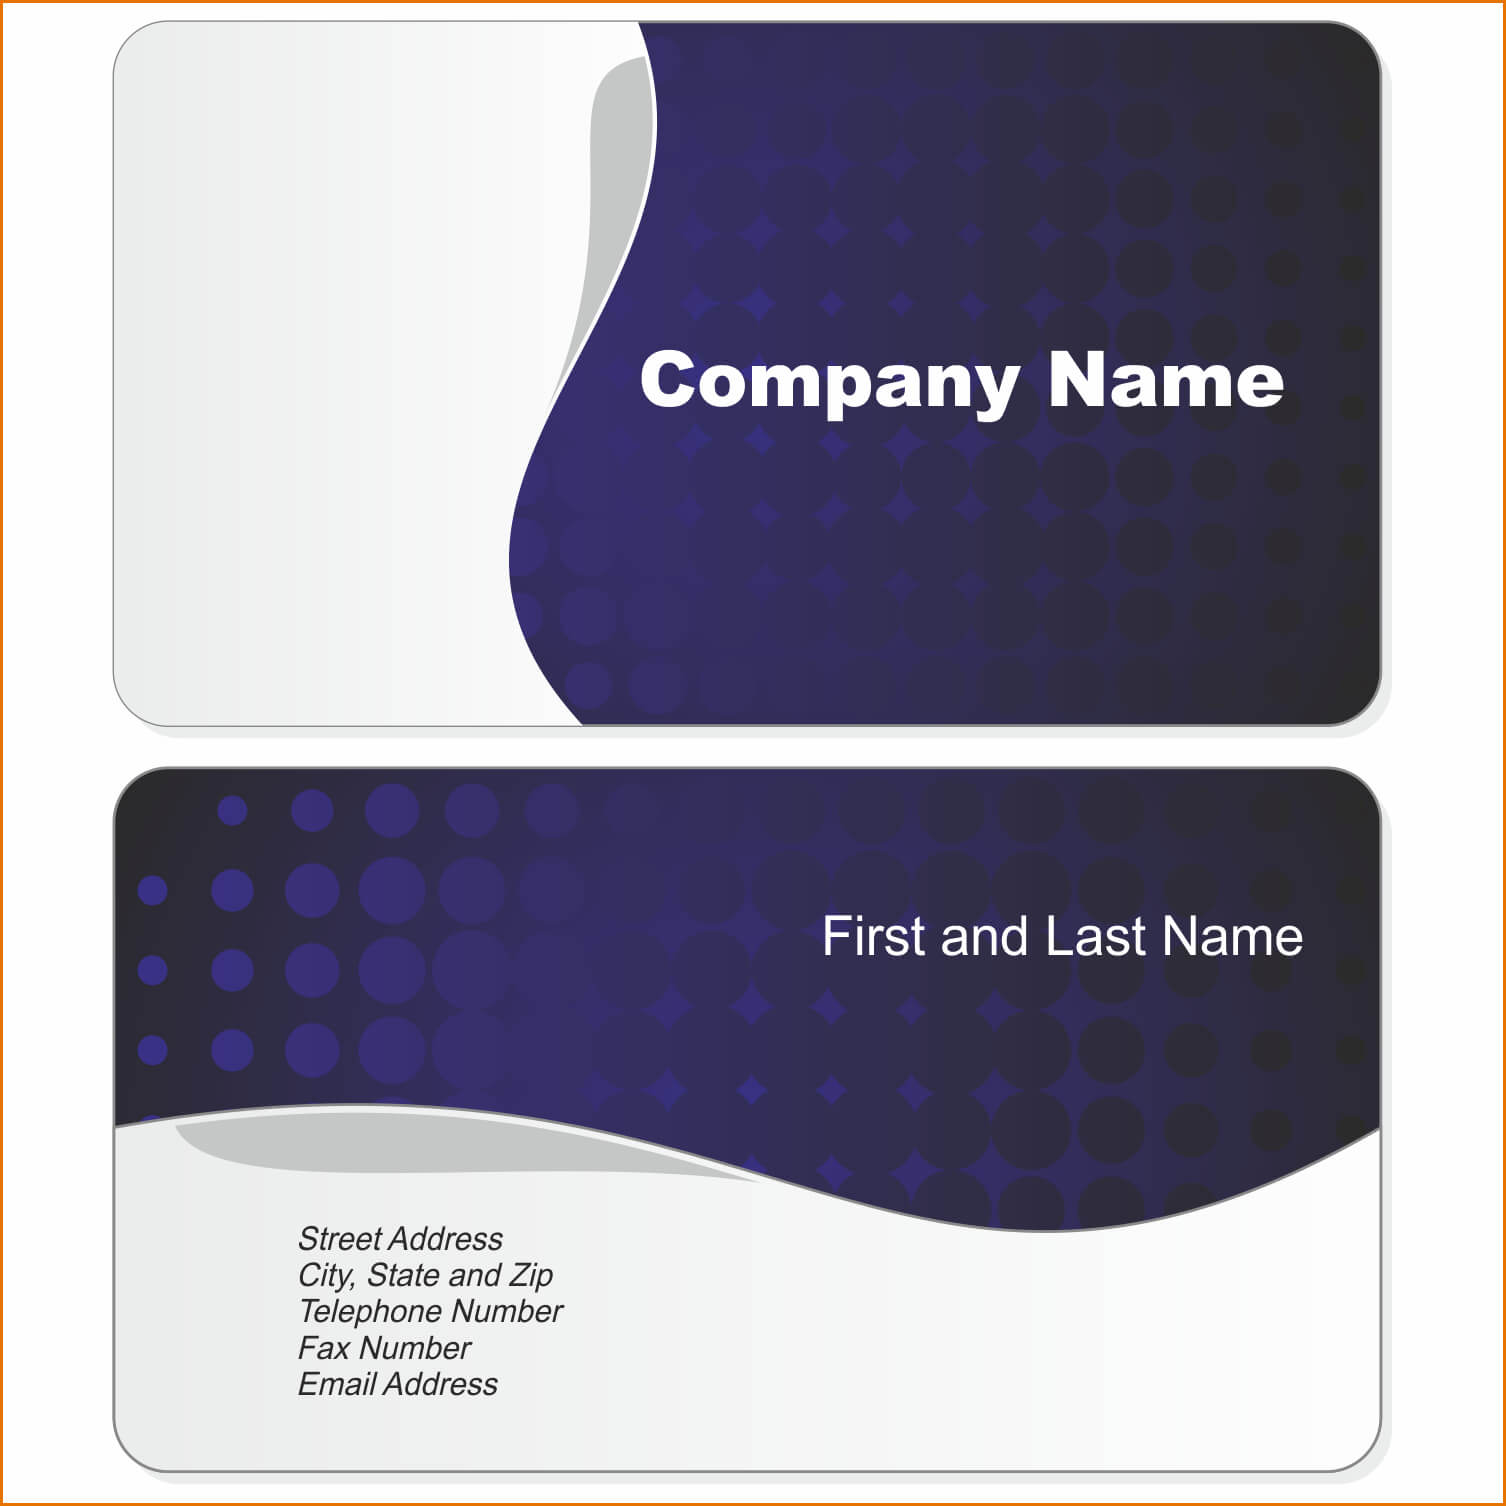 Microsoft Business Card Template Free Download Best Famous Pertaining To Microsoft Templates For Business Cards